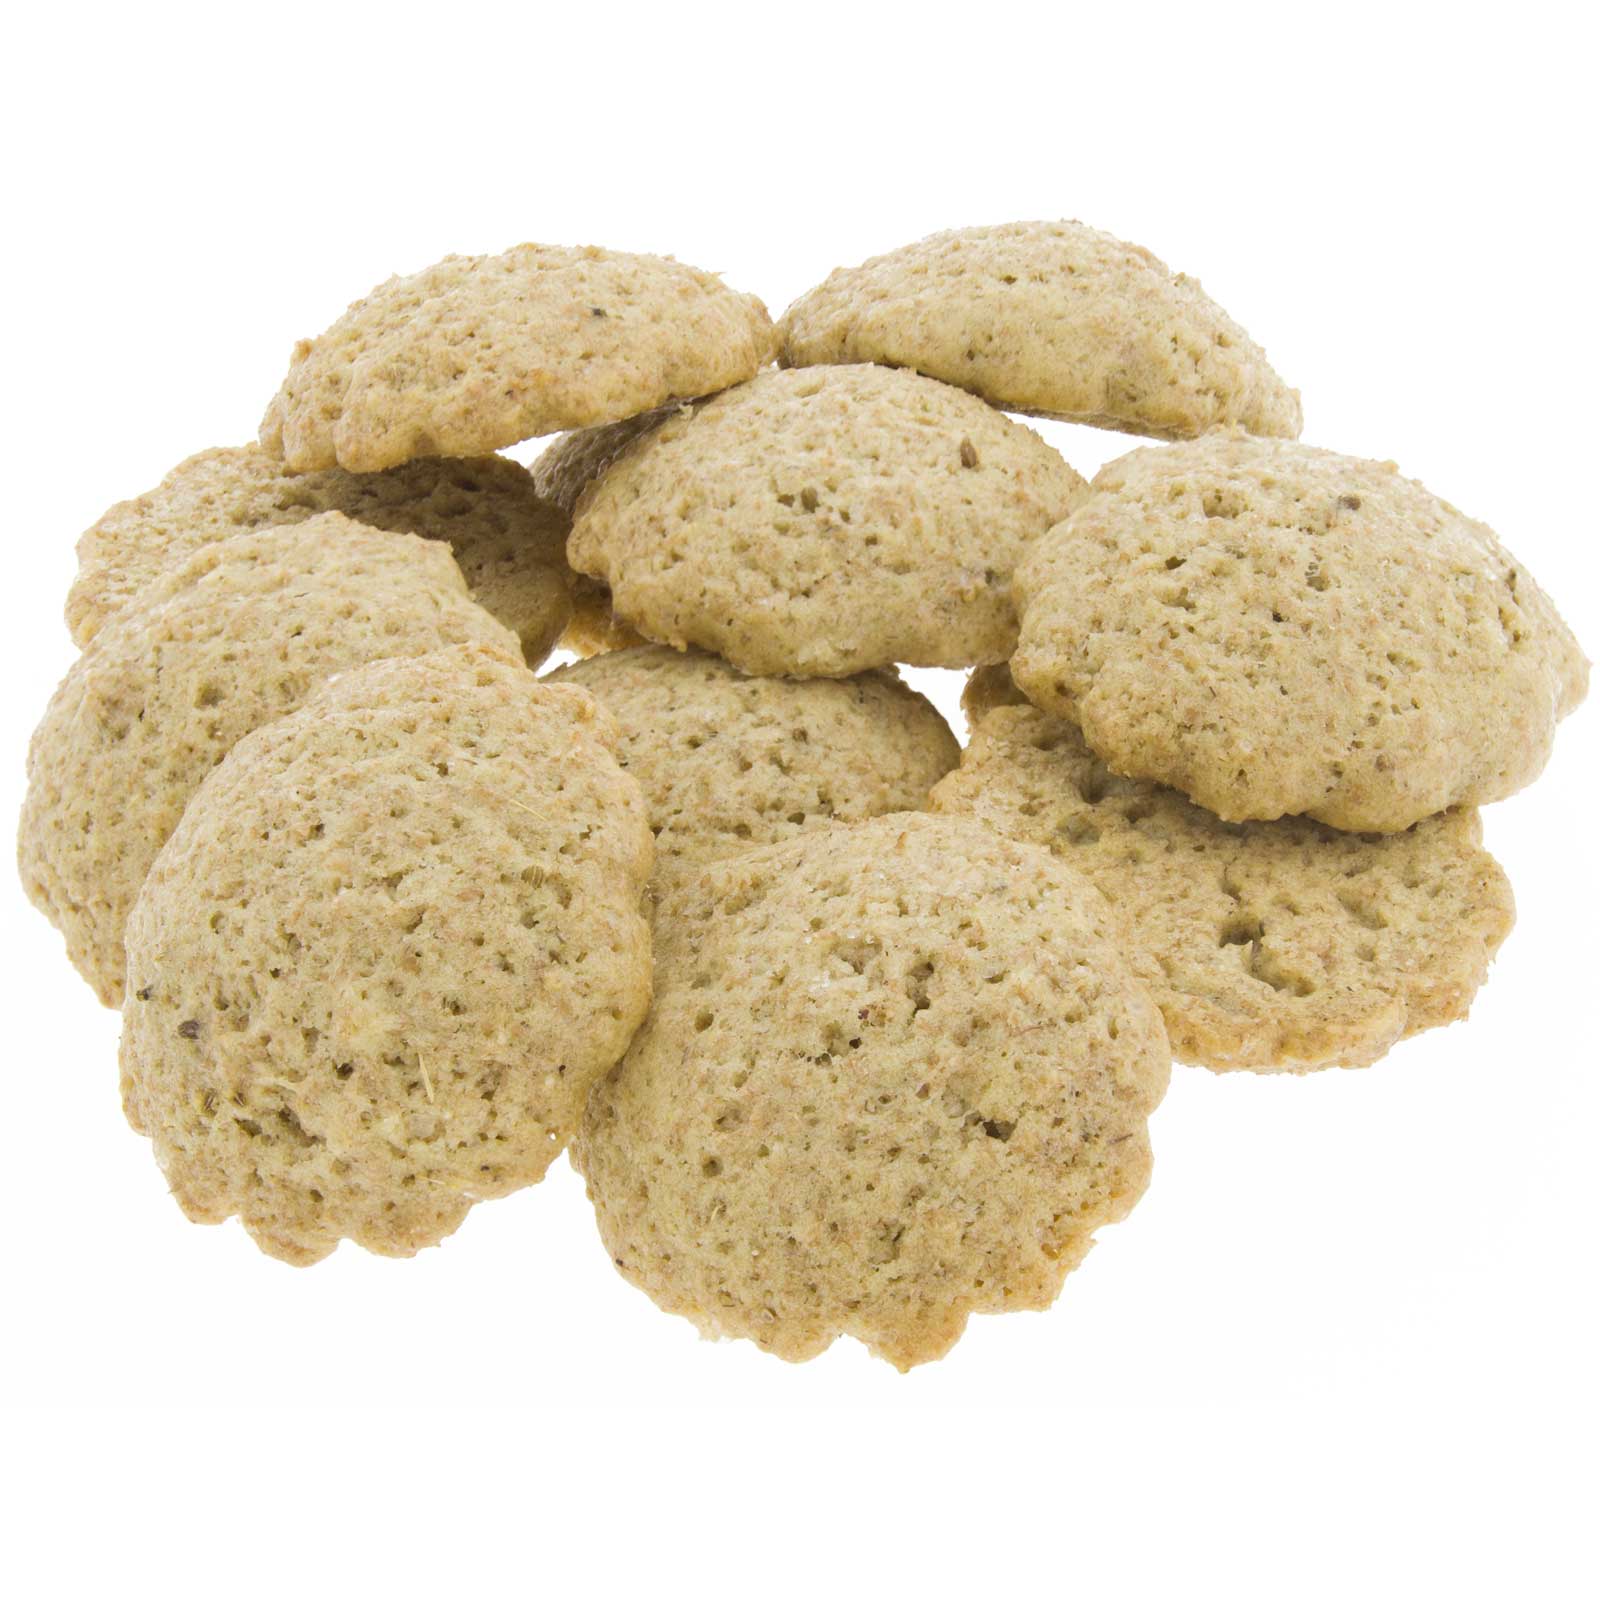 Romanic spelled integral 200G Craft ecological cookies